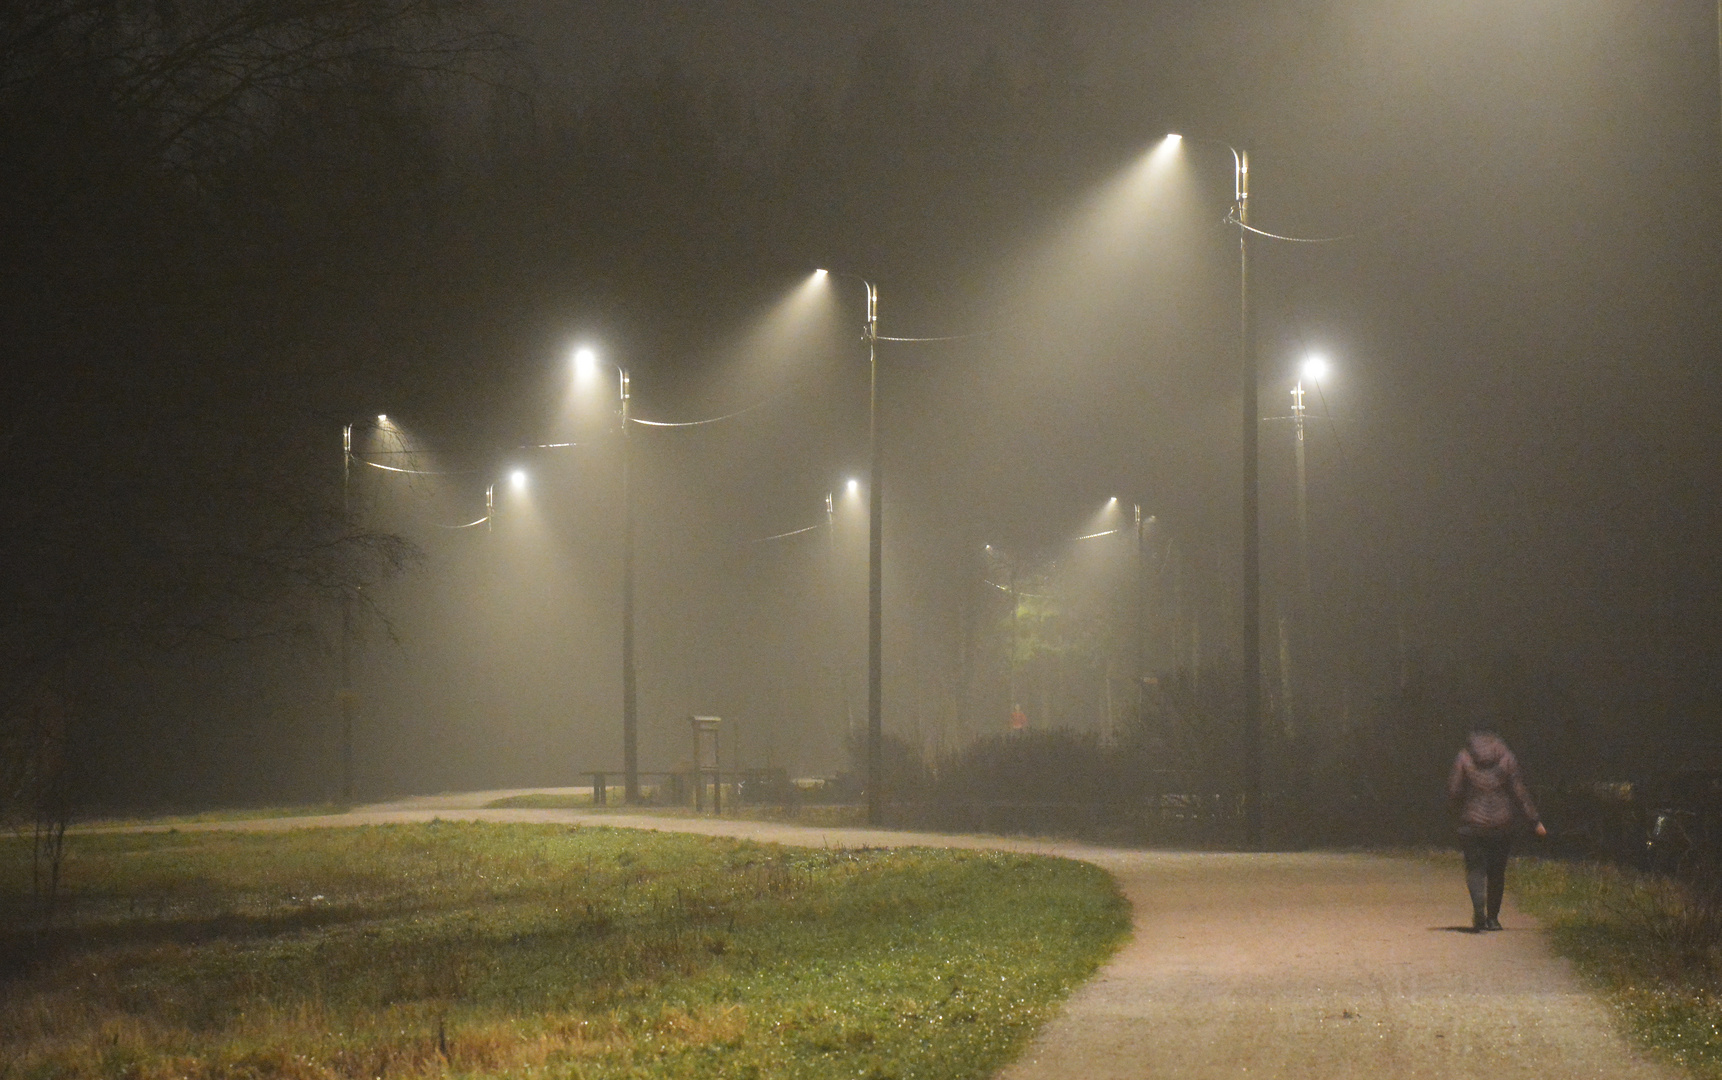 The park way in the foggy evening